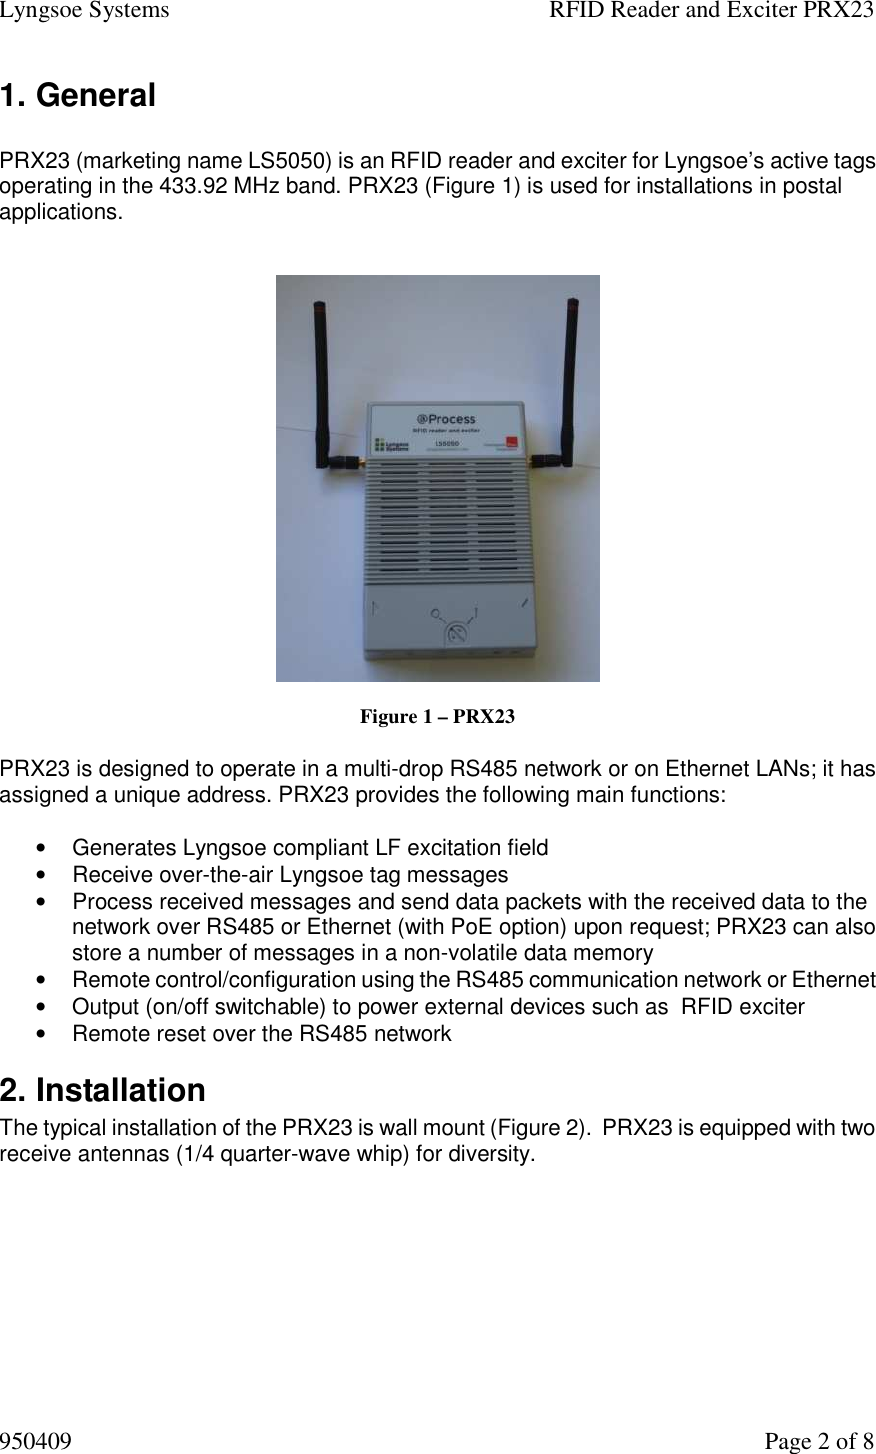 Lyngsoe Systems    RFID Reader and Exciter PRX23 950409    Page 2 of 8 1. General   PRX23 (marketing name LS5050) is an RFID reader and exciter for Lyngsoe’s active tags operating in the 433.92 MHz band. PRX23 (Figure 1) is used for installations in postal applications.      Figure 1 – PRX23  PRX23 is designed to operate in a multi-drop RS485 network or on Ethernet LANs; it has assigned a unique address. PRX23 provides the following main functions:   •  Generates Lyngsoe compliant LF excitation field •  Receive over-the-air Lyngsoe tag messages  •  Process received messages and send data packets with the received data to the network over RS485 or Ethernet (with PoE option) upon request; PRX23 can also store a number of messages in a non-volatile data memory  •  Remote control/configuration using the RS485 communication network or Ethernet  •  Output (on/off switchable) to power external devices such as  RFID exciter   •  Remote reset over the RS485 network 2. Installation  The typical installation of the PRX23 is wall mount (Figure 2).  PRX23 is equipped with two receive antennas (1/4 quarter-wave whip) for diversity.     